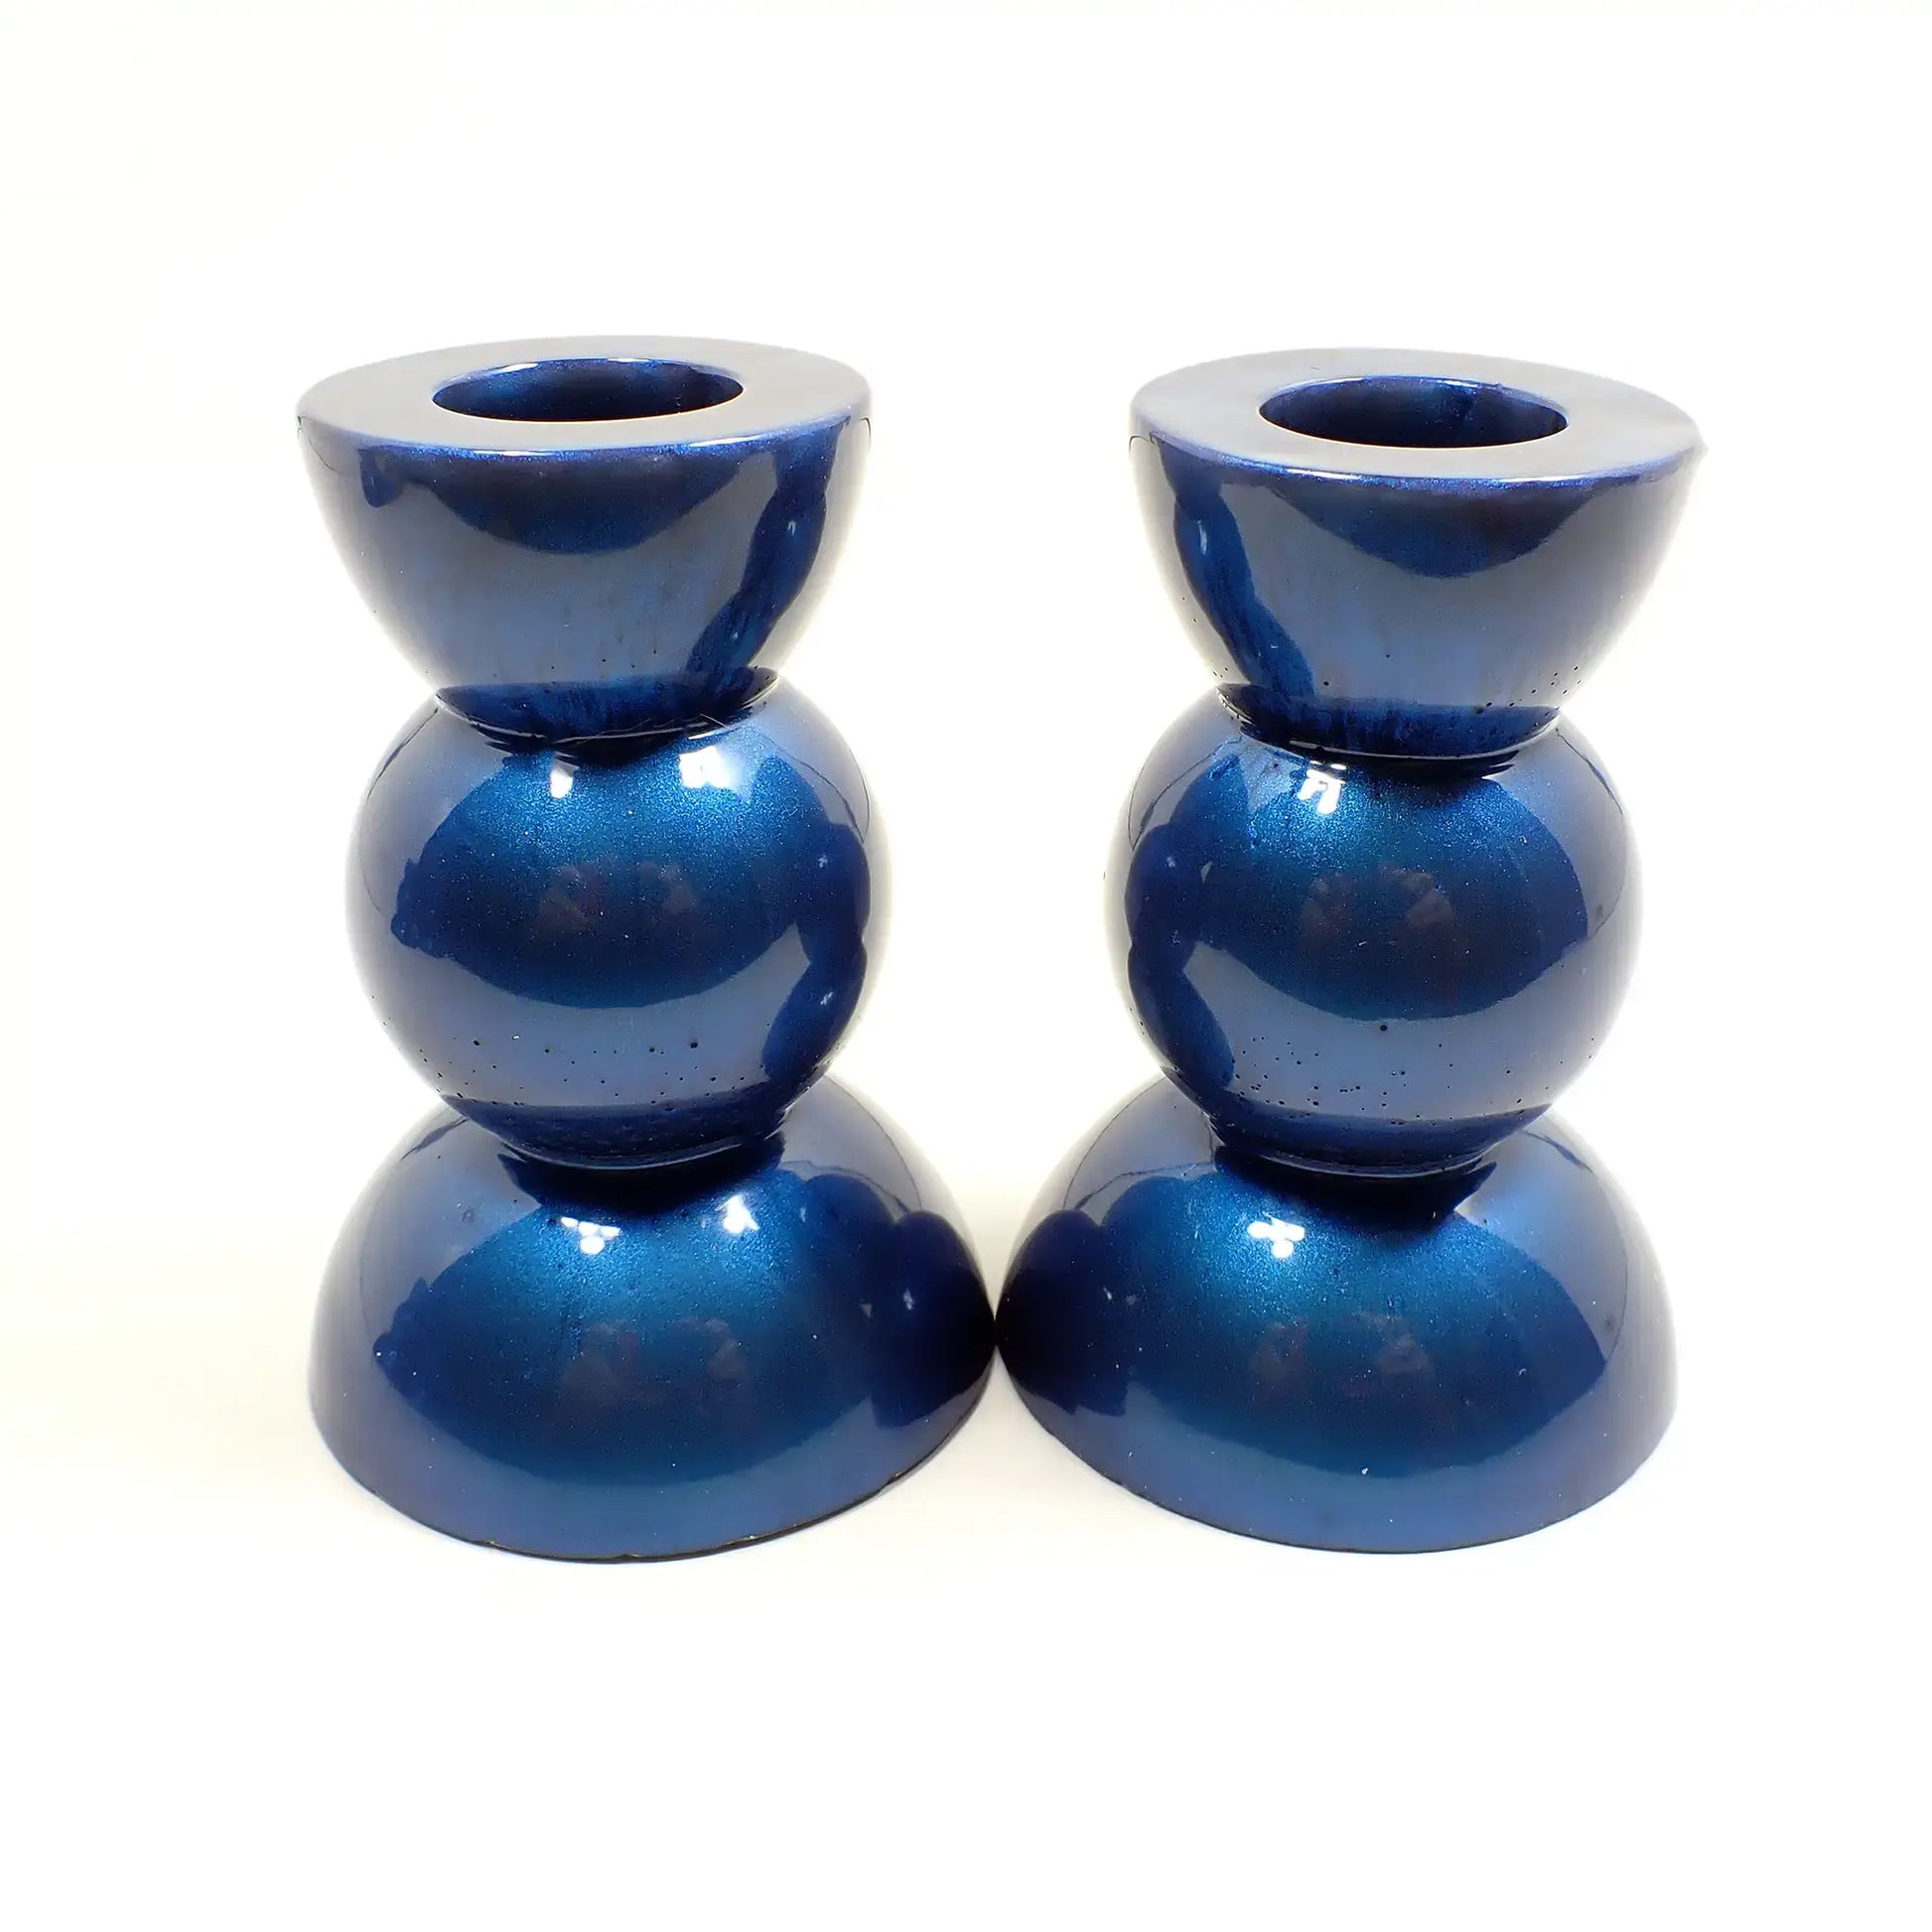 Side view of the handmade geometric candlestick holders. They have a round ball area in the middle and a semi sphere shape on the top and bottom. The resin is a pearly deep blue color.